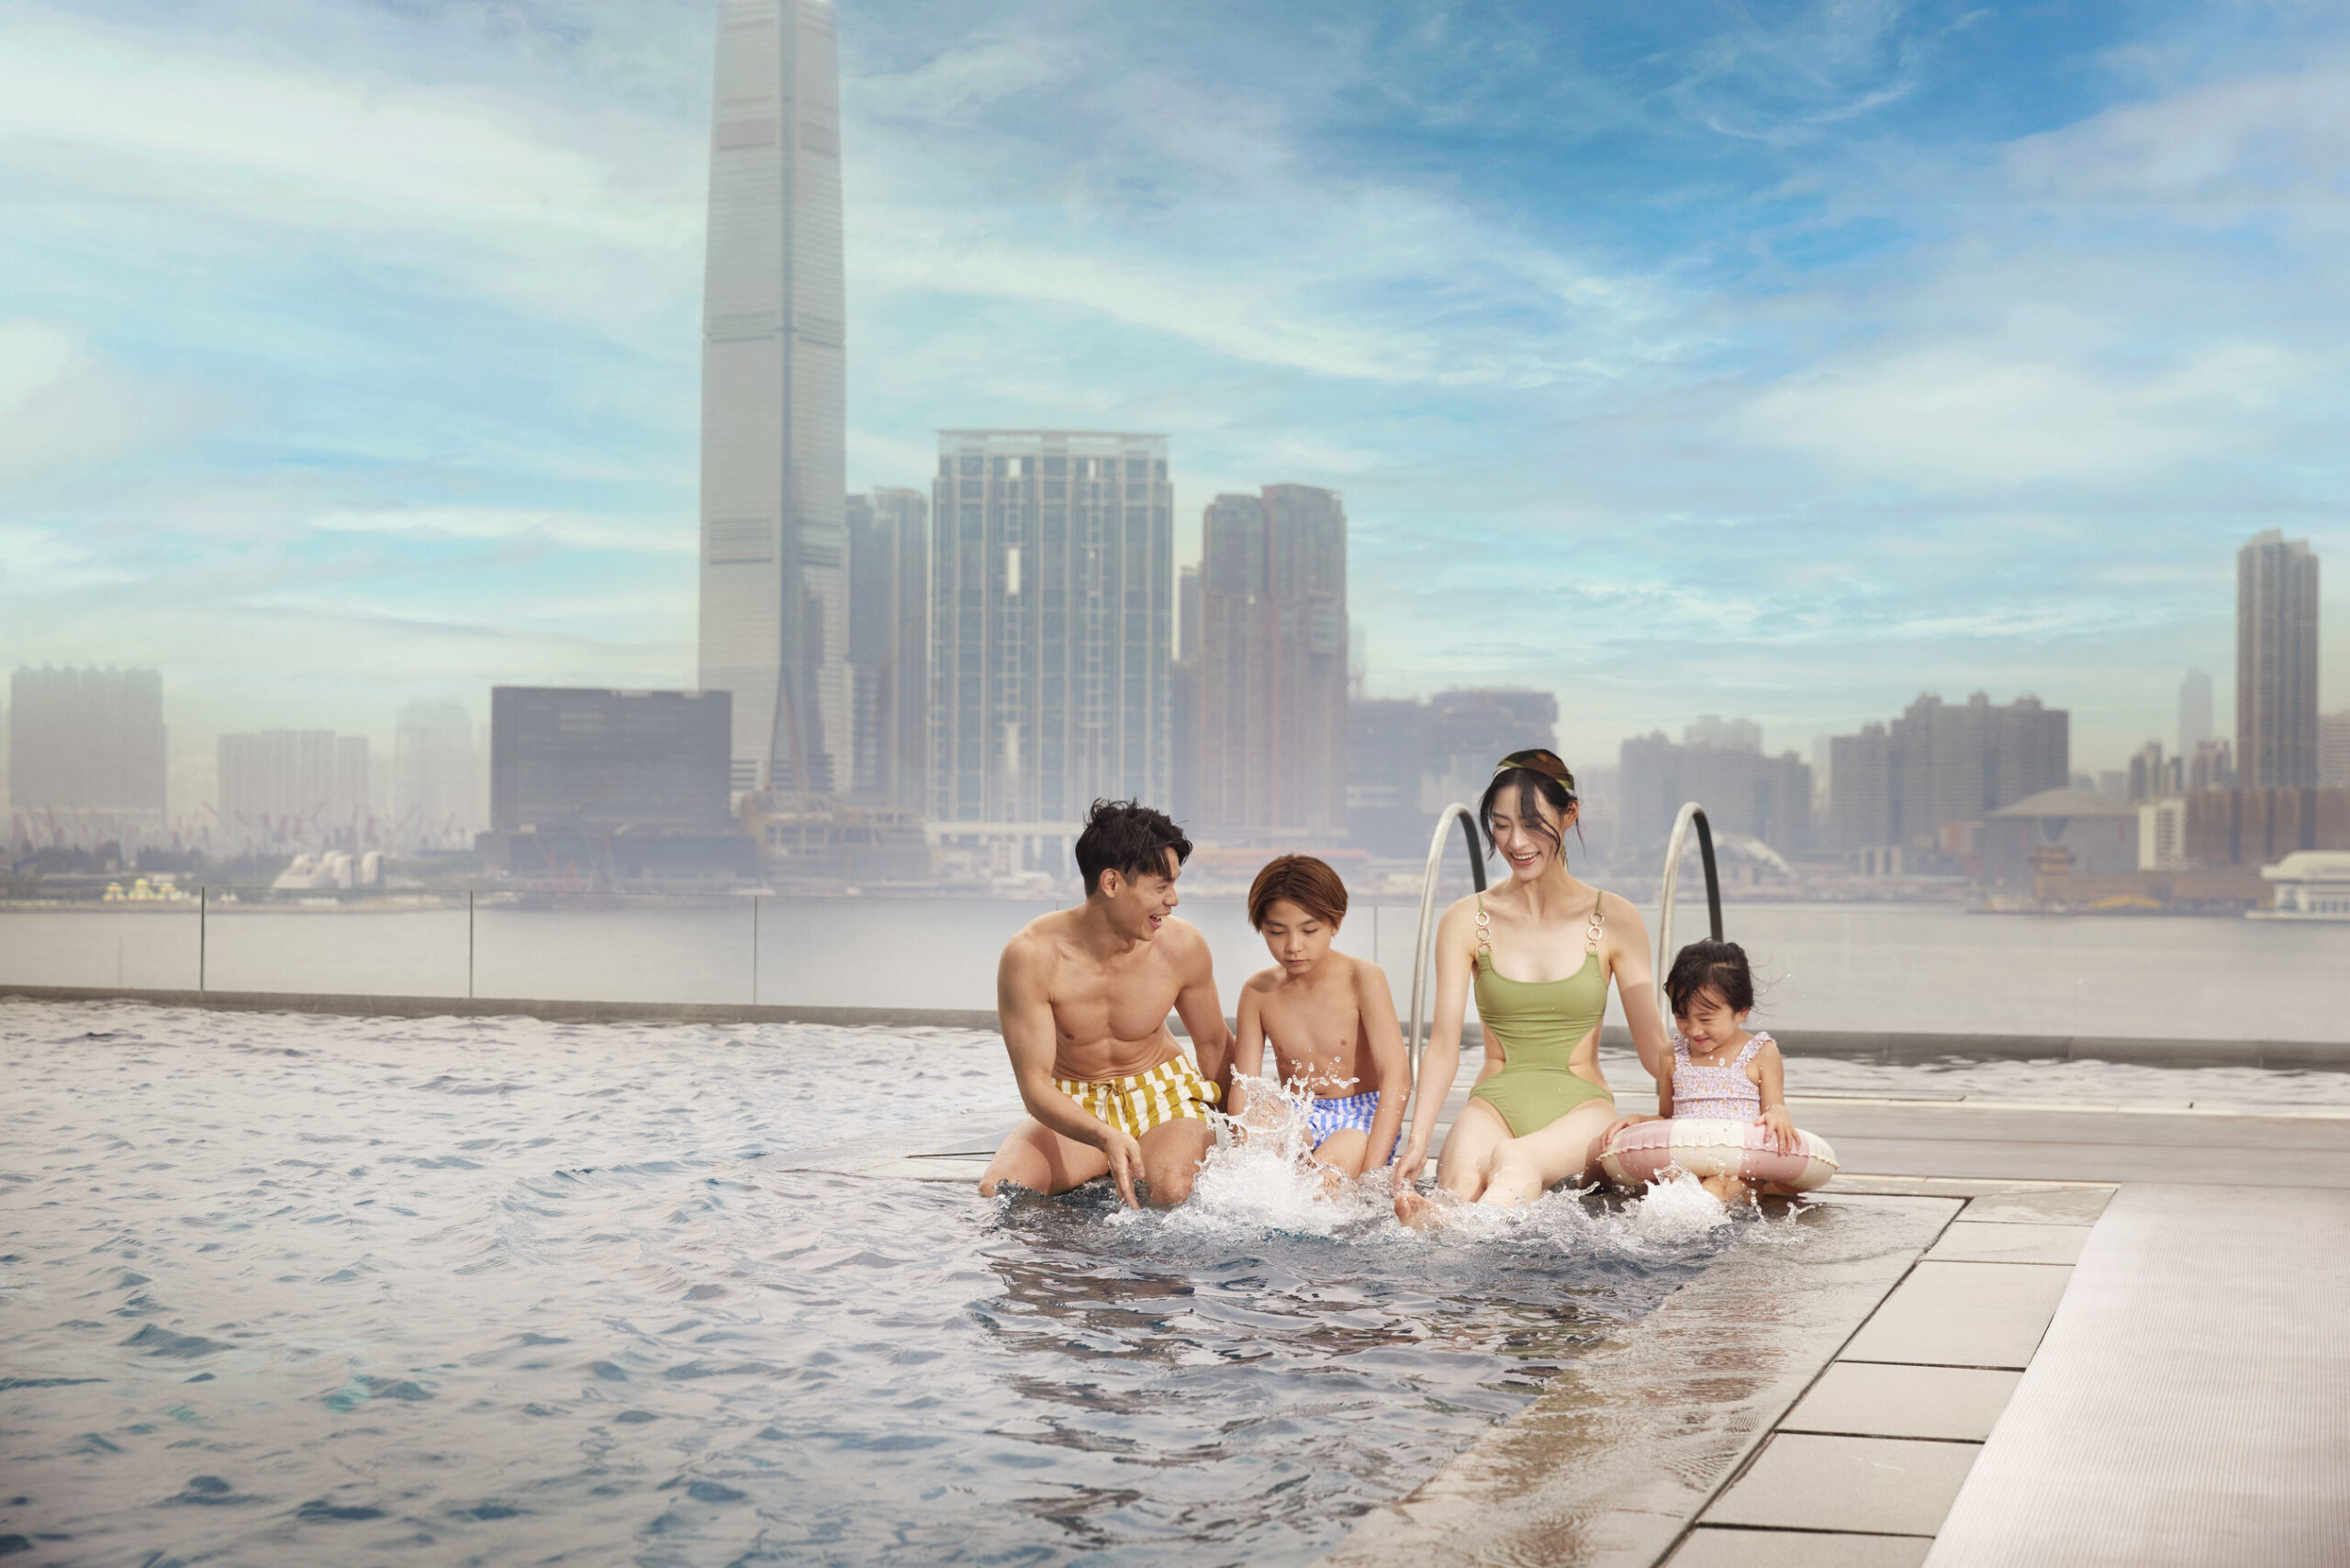 Four Seasons Hotel Hong Kong offers a luxurious summer escape with immersive activities, dining discounts, wellness cuisine, and special family packages, including a "Junior Hospitality Explorer" program for kids.